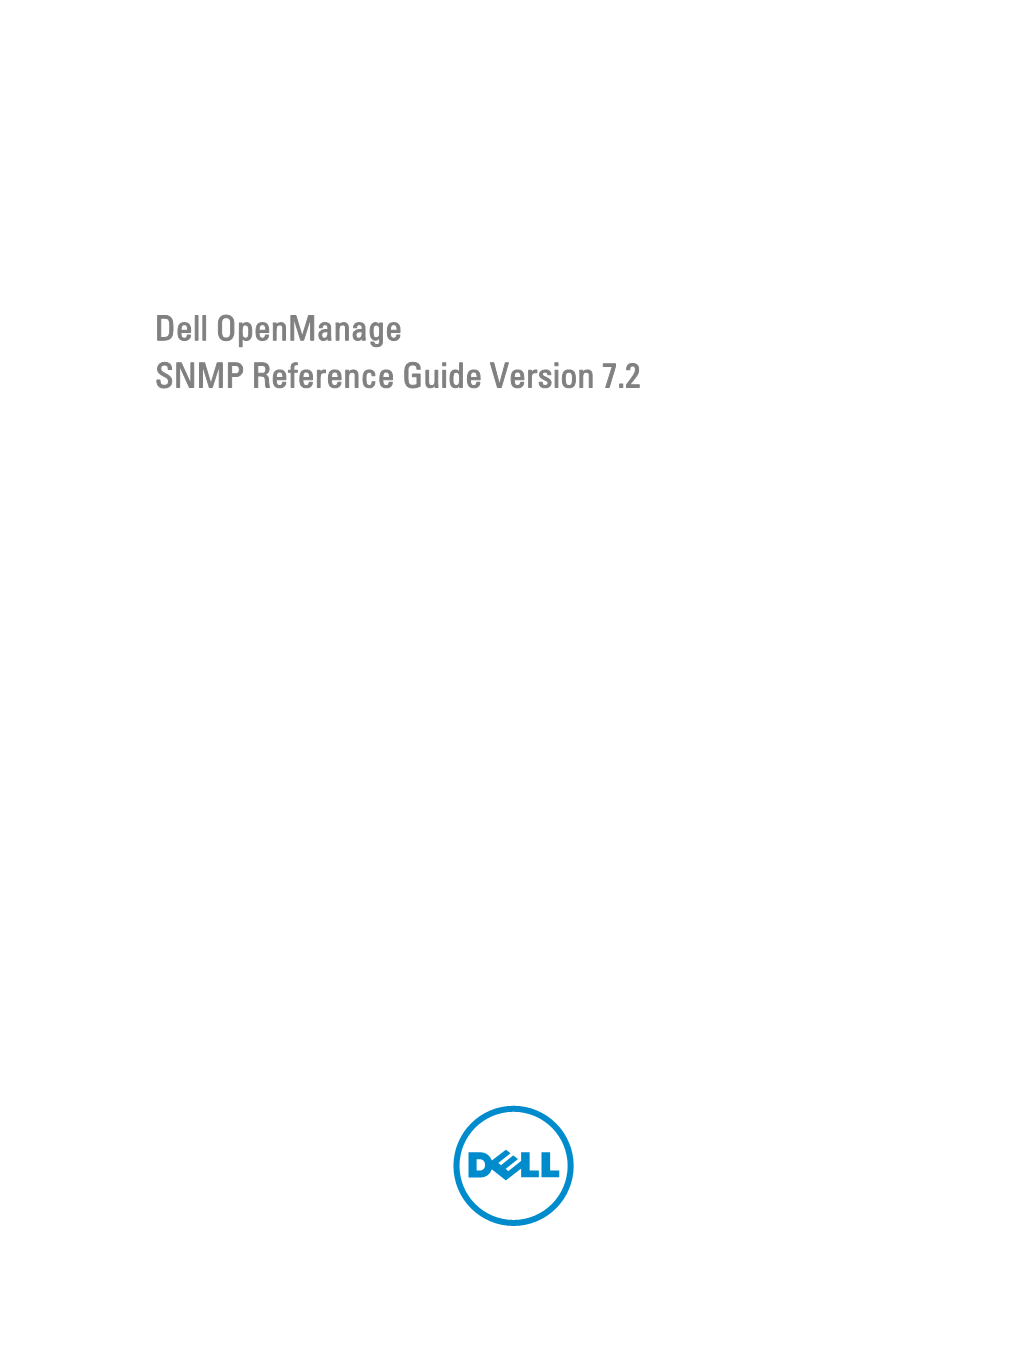 Dell Openmanage SNMP Reference Guide Version 7.2 Notes, Cautions, and Warnings